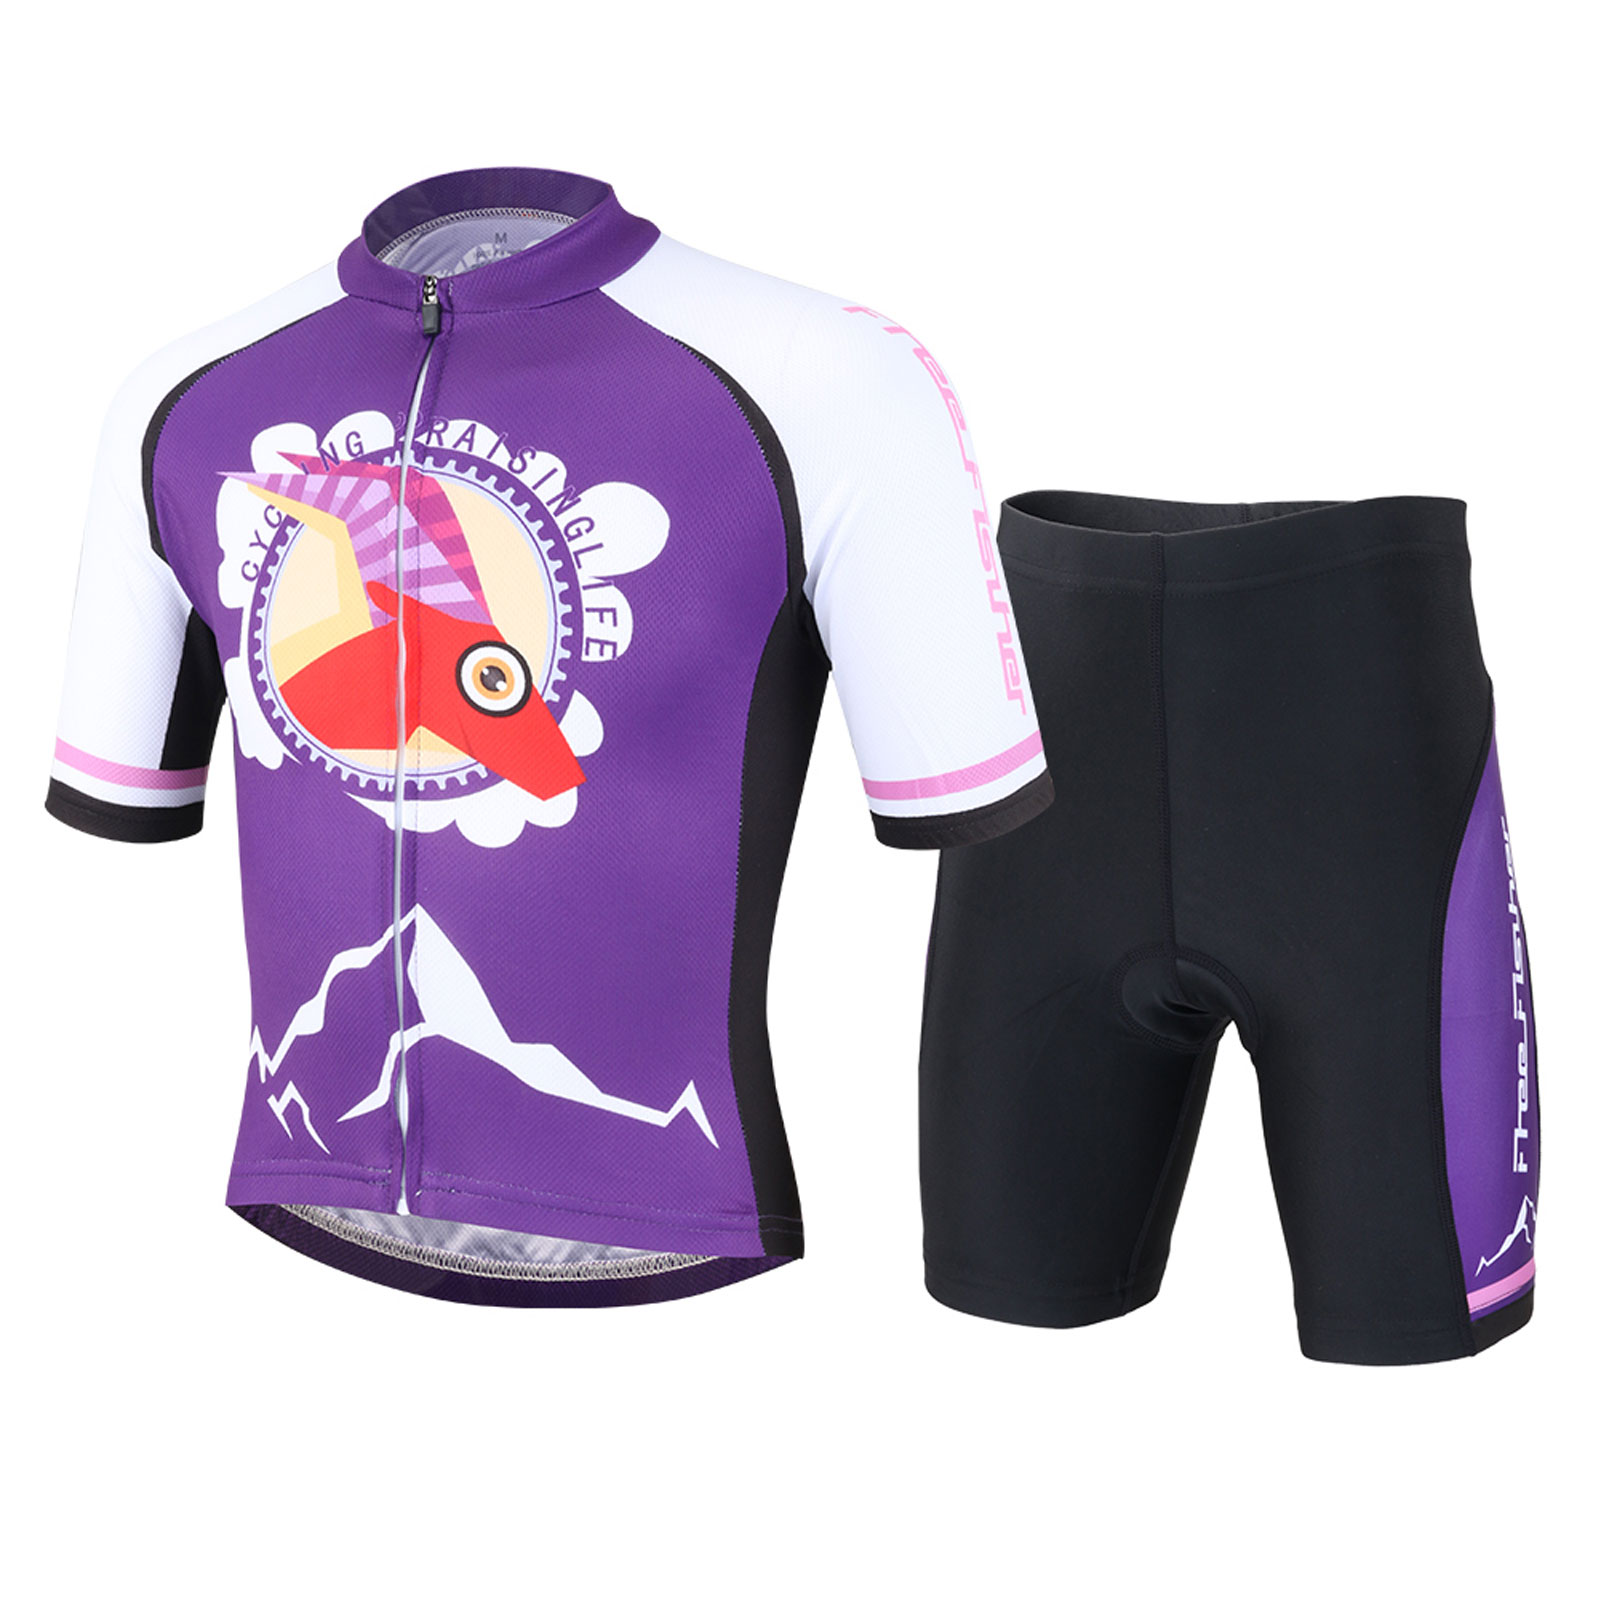 FREE FISHER Girls Cycling Jersey Short Sleeve Full Zipper Quick-Dry Breathable Mesh Boys Bicycle Tops+Padded Shorts Purple Antelope